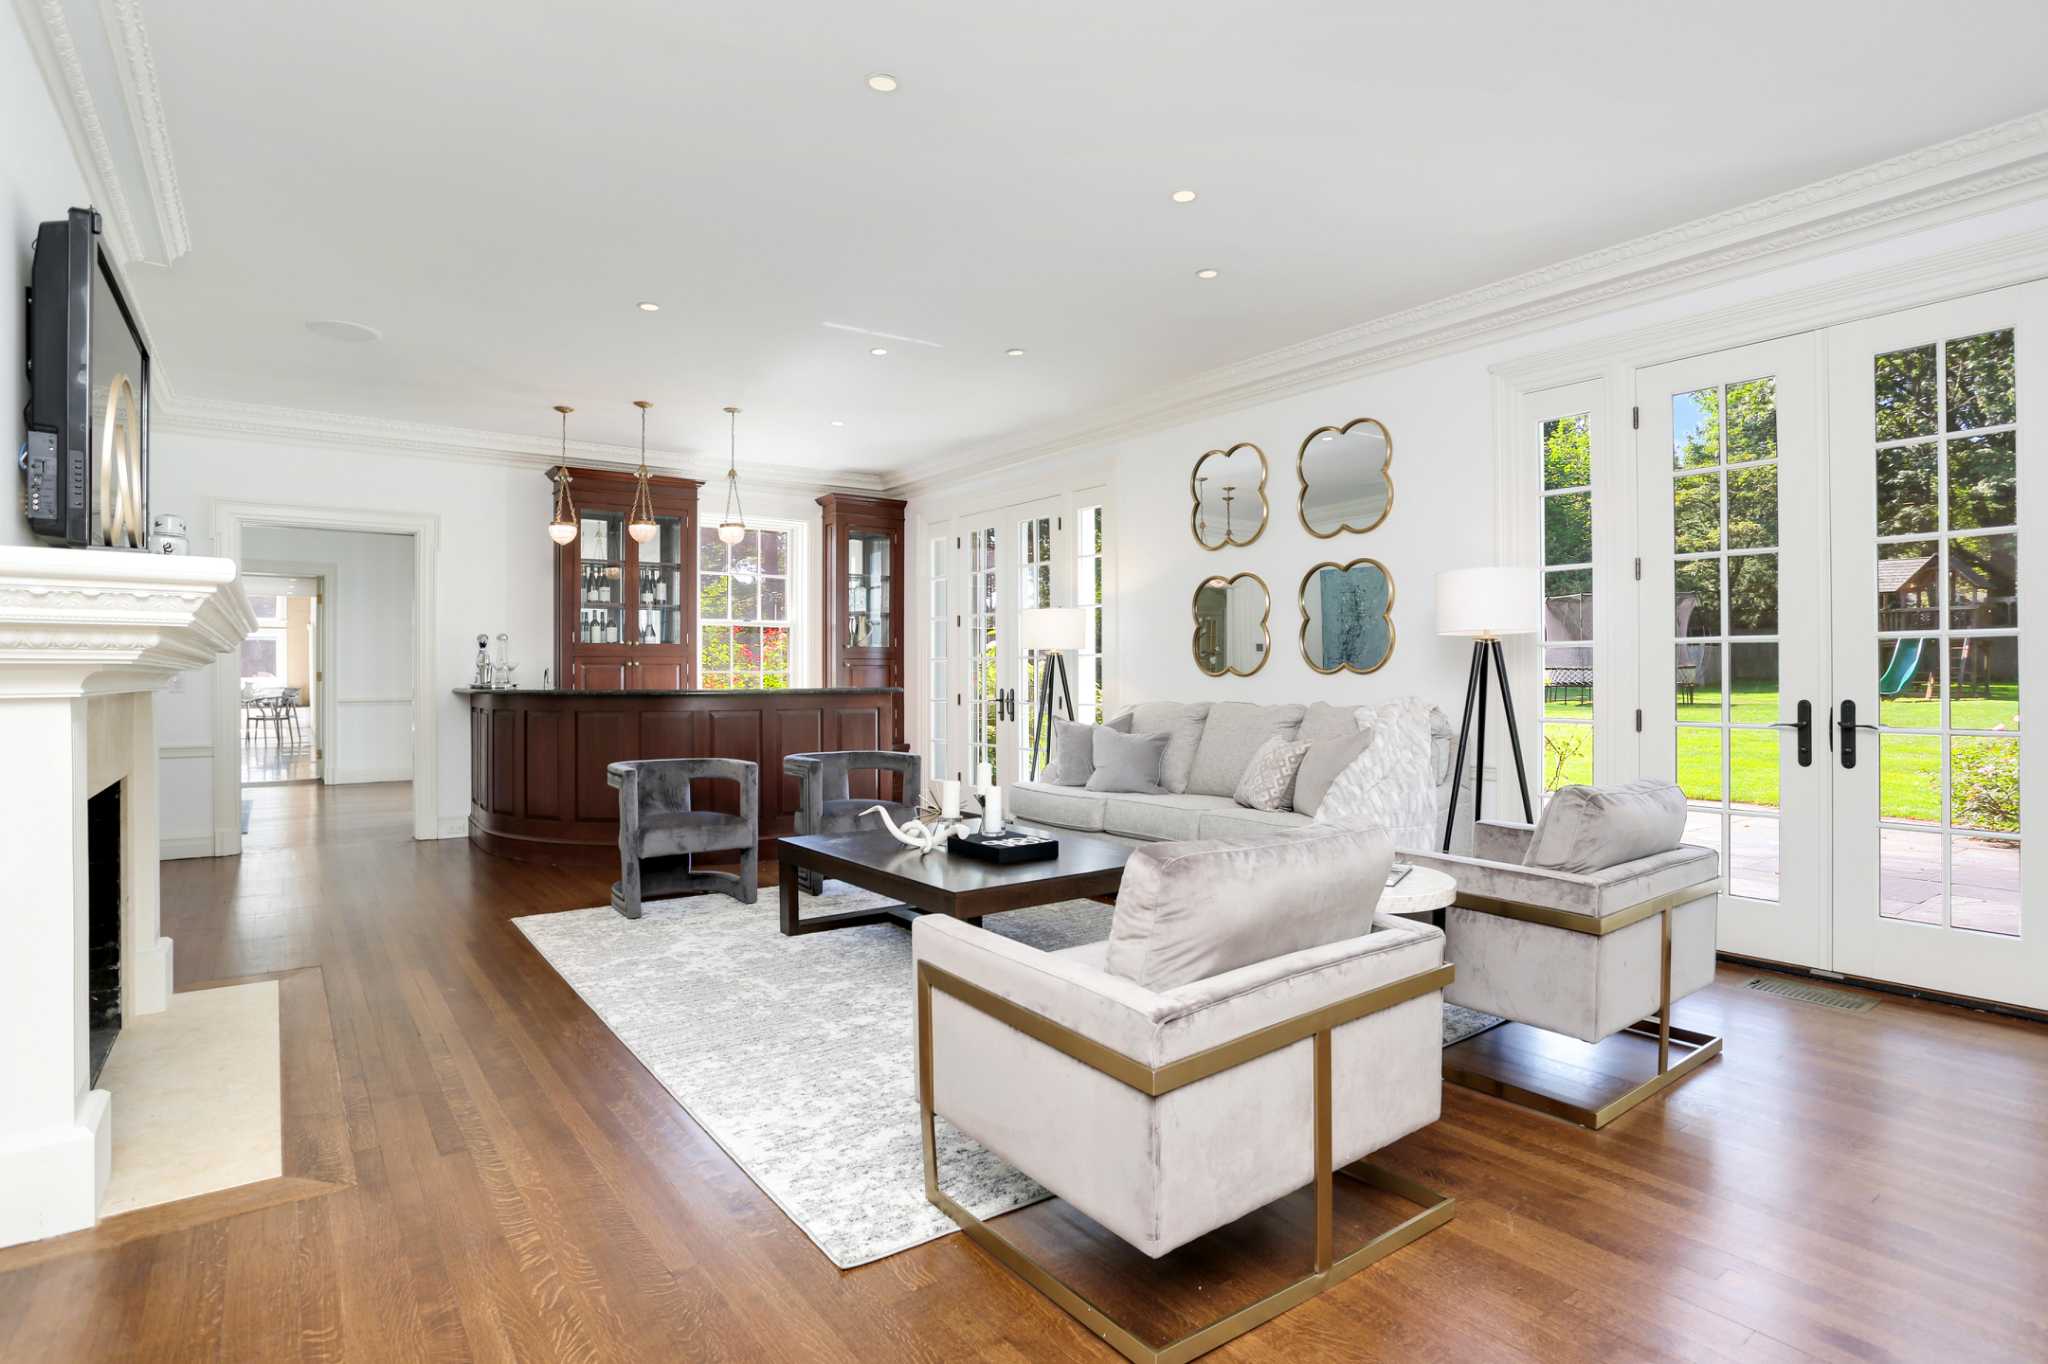 Luxury Market Listings Afford Bar Areas In Public And Family Rooms